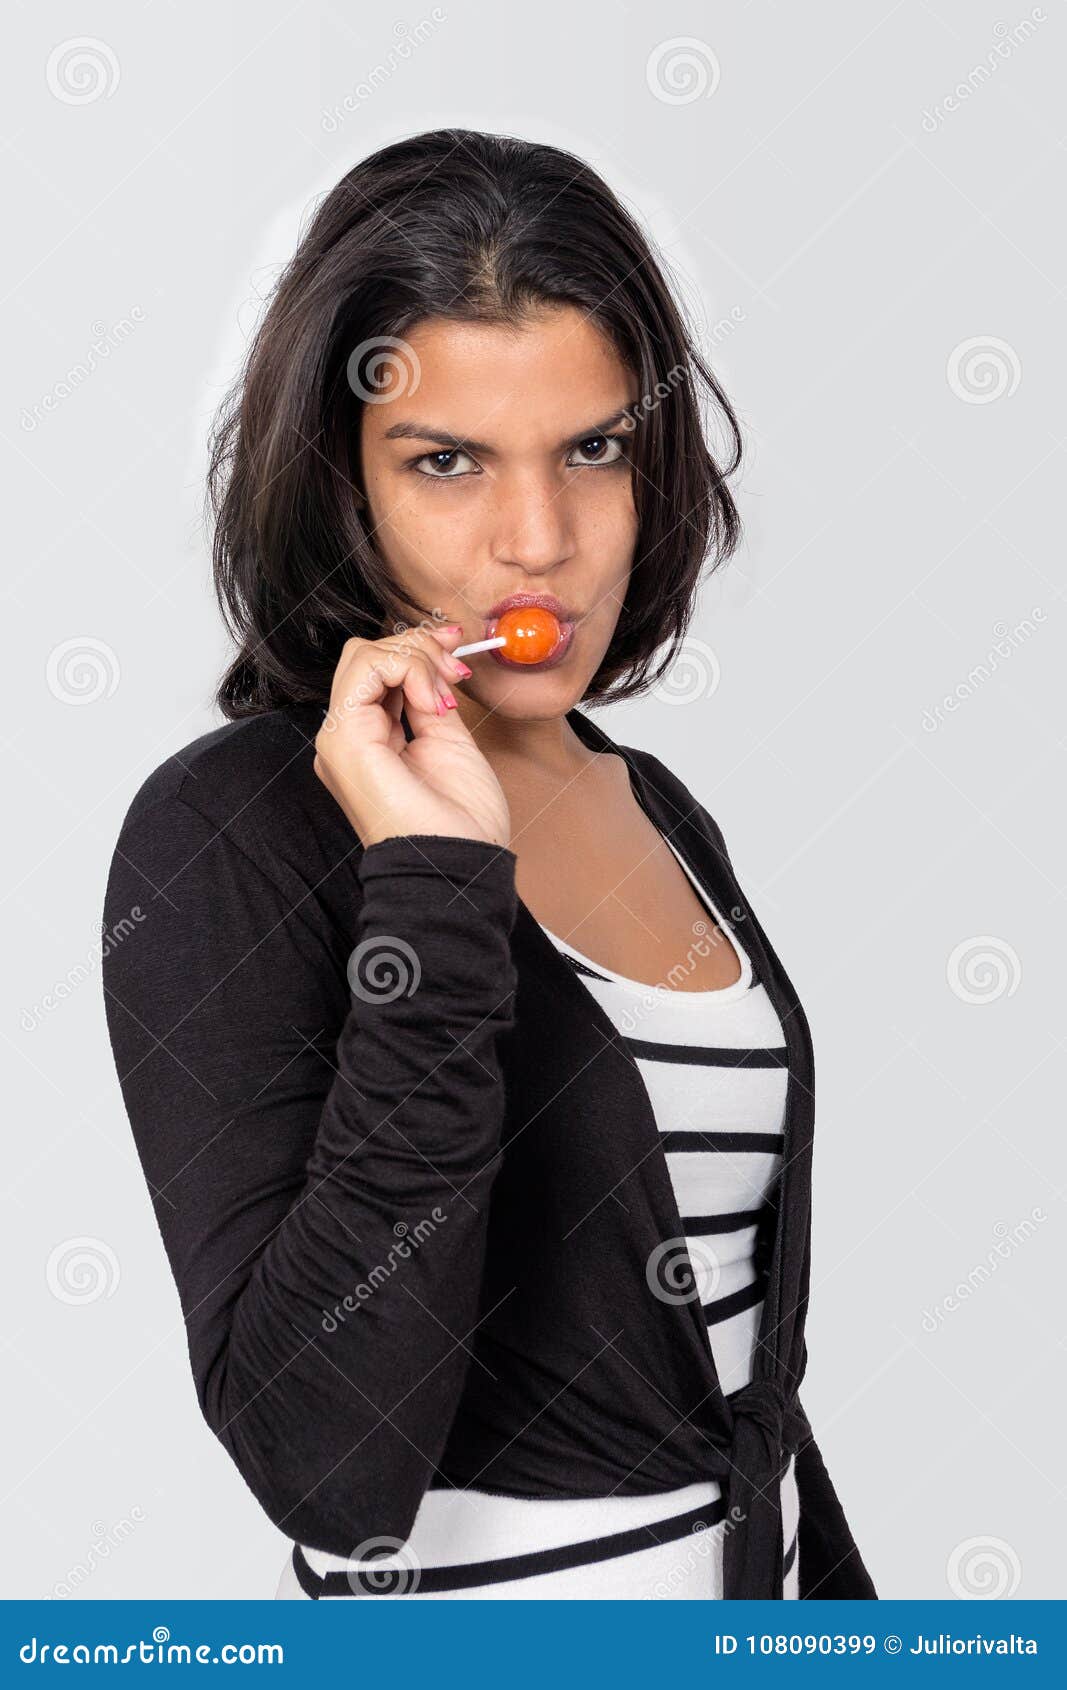 Young Black Haired Girl With A Candy Stock Image Image Of Closeup